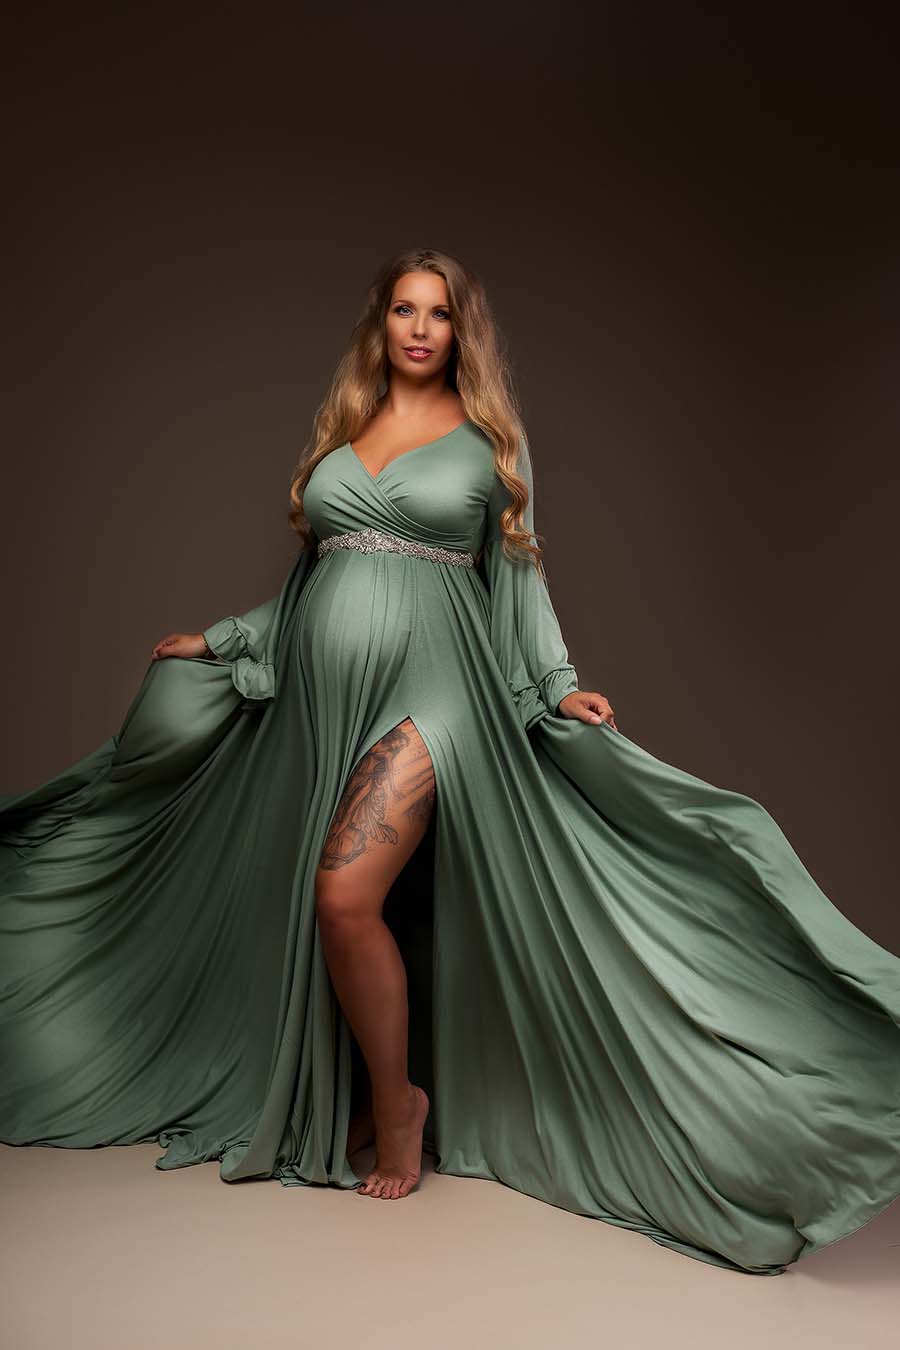 Blond pregnant model poses in a studio with an azur colored dress. The dress features long flared sleeves with ruffle details and an adjustable sweetheart neckline. The model holds with both hands the sides from the skirt so the wideness from the long skirt can be easily seen. She faces the camera and the dress can be almost completely seen. One of the models legs can be see through the side split in the skirt.